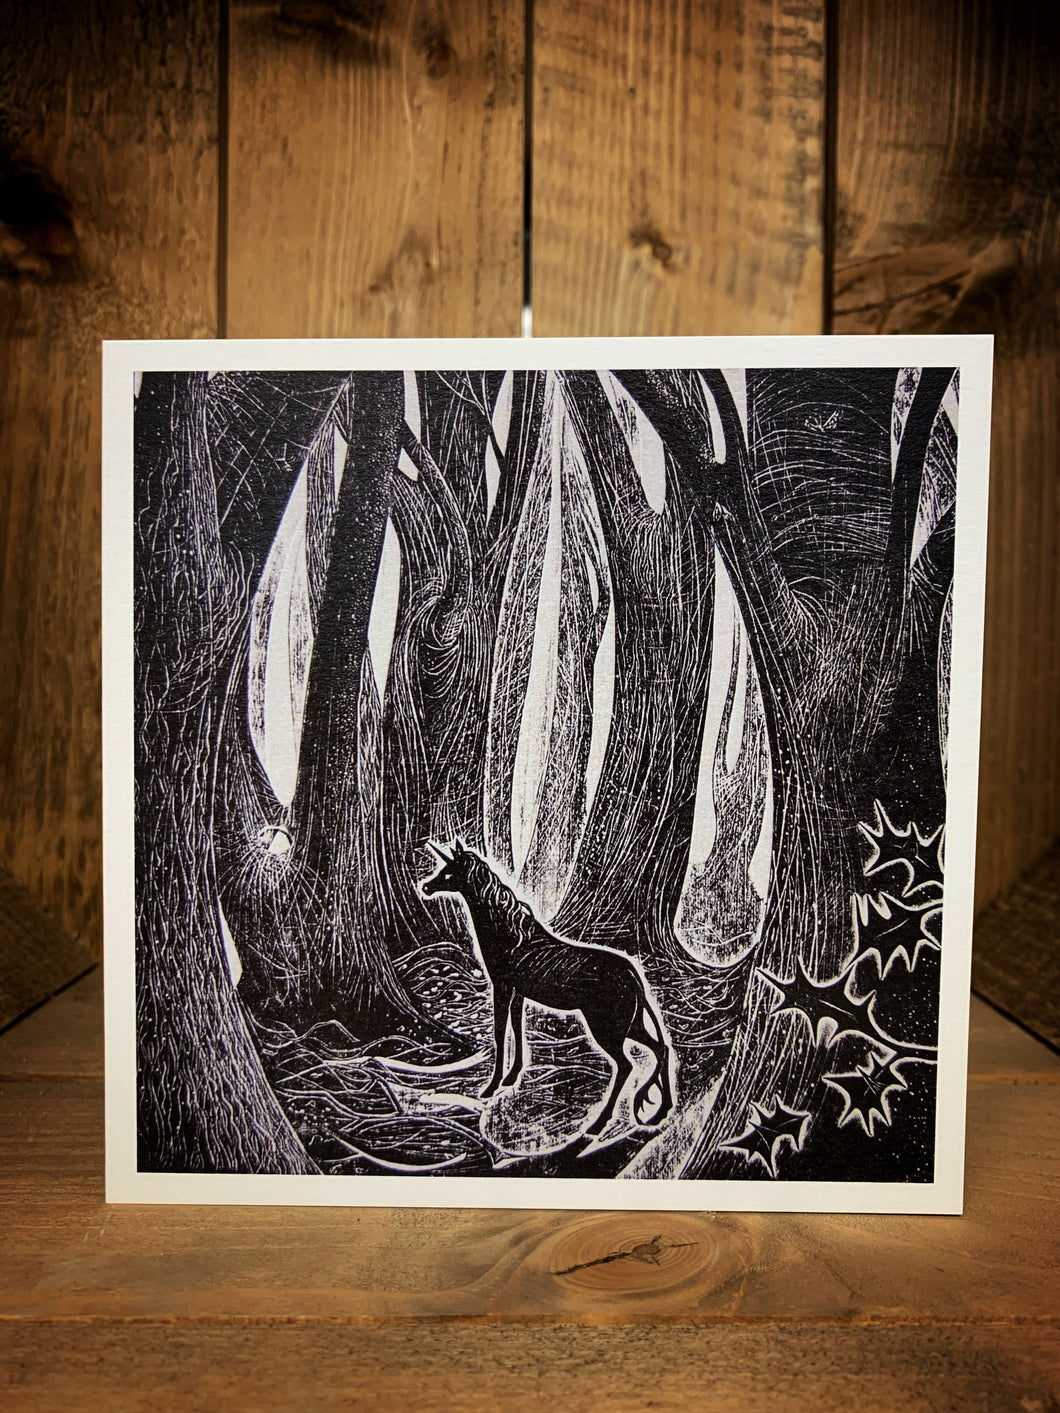 Image of a square greetings card featuring a black and white image block printed showing a forest scene with a unicorn in a clearing with a white border and holly leaves in the foreground.